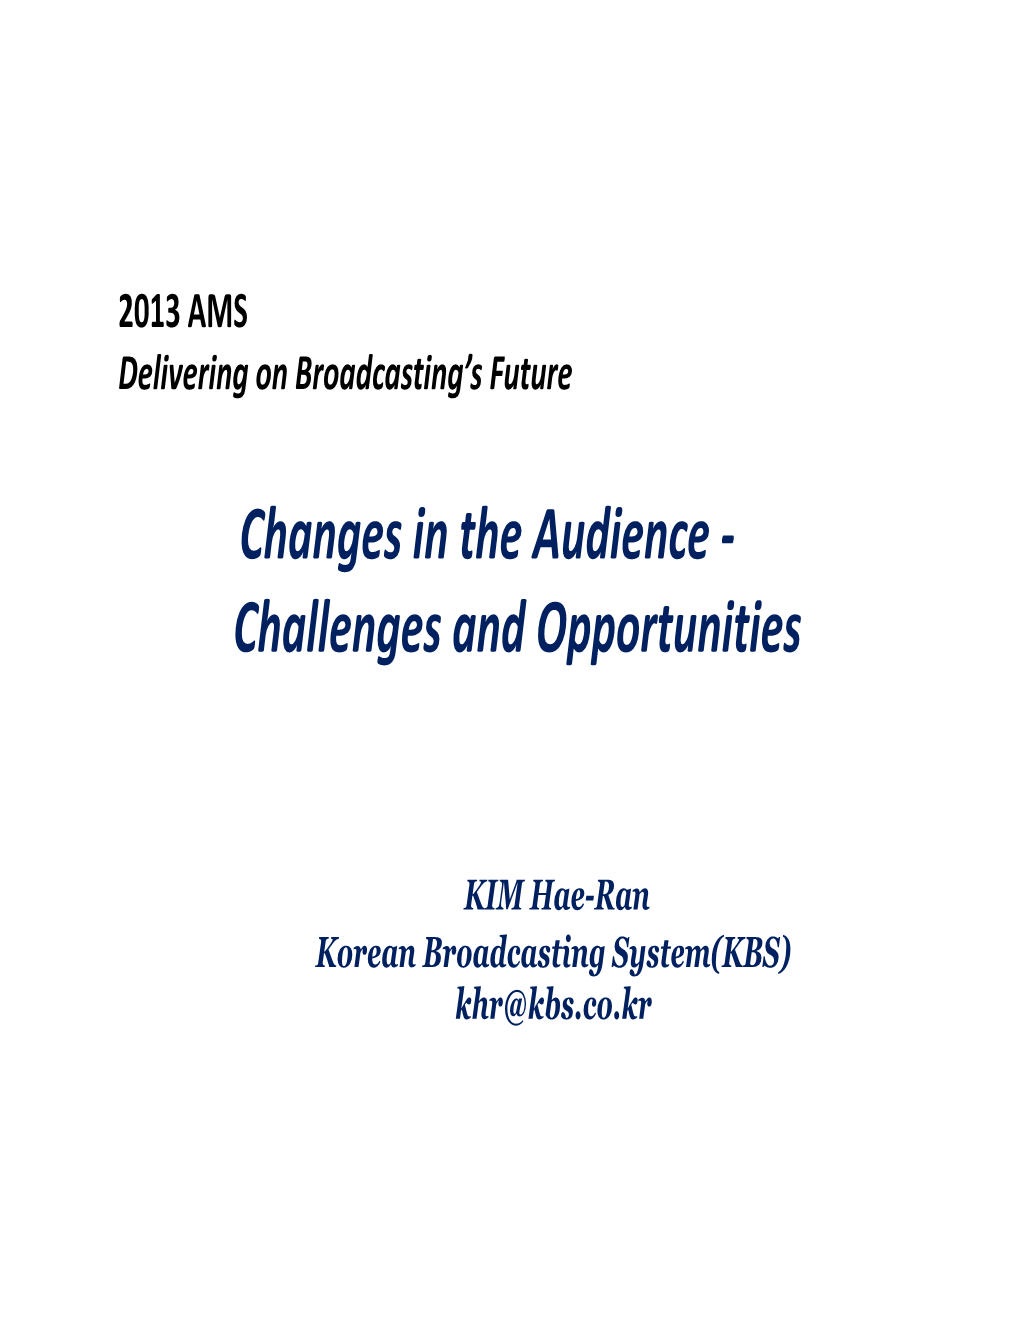 Changes in the Audience - Challenges and Opportunities